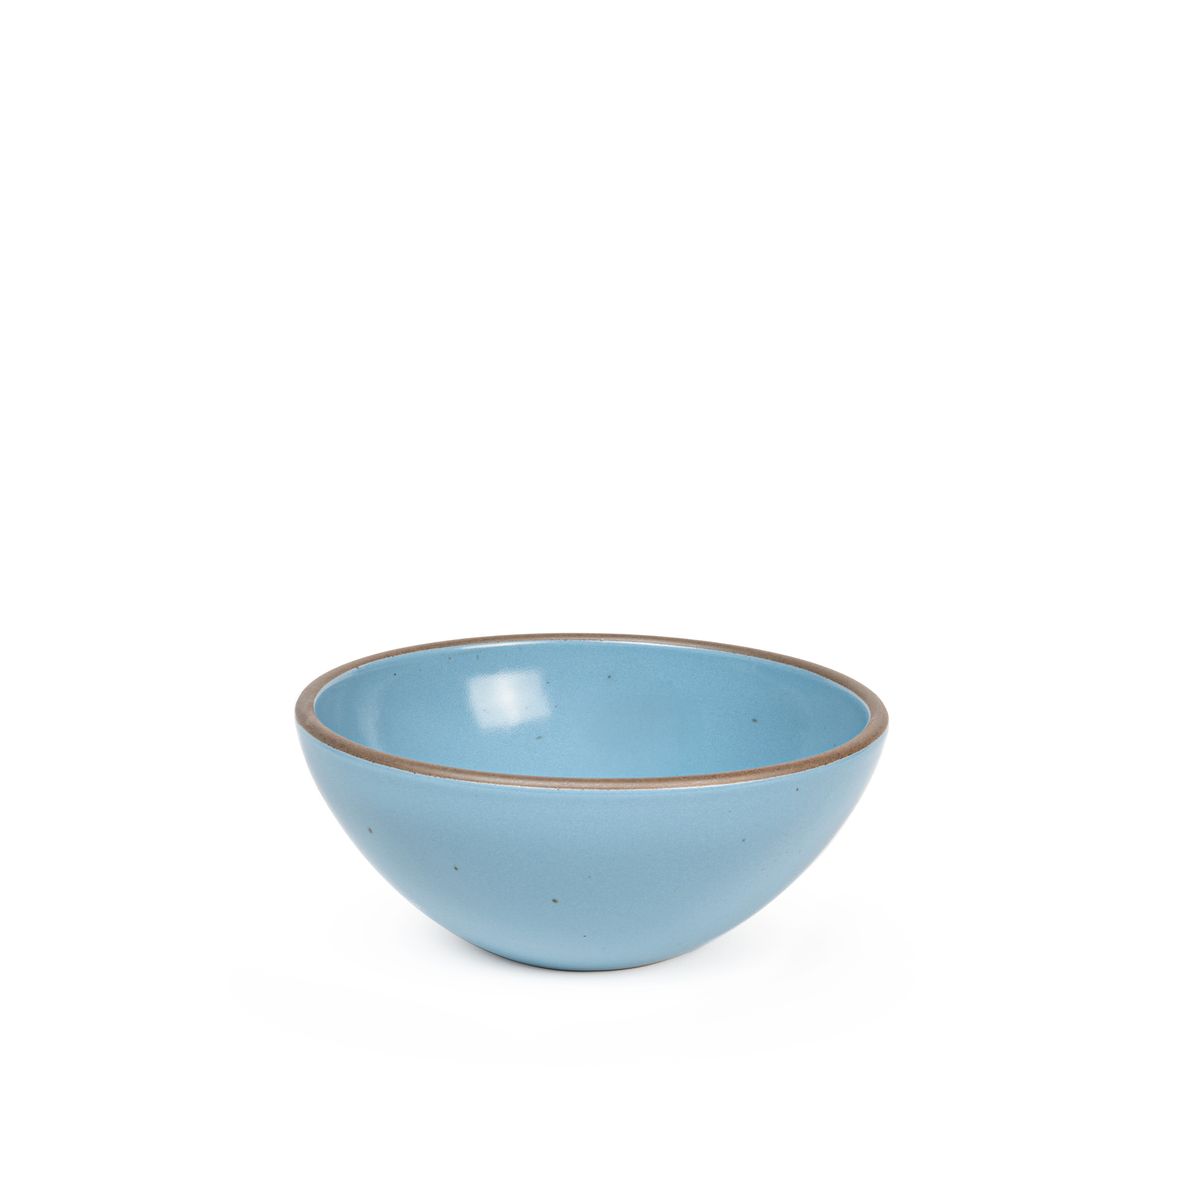 A medium rounded ceramic bowl in a robin's egg blue color featuring iron speckles and an unglazed rim